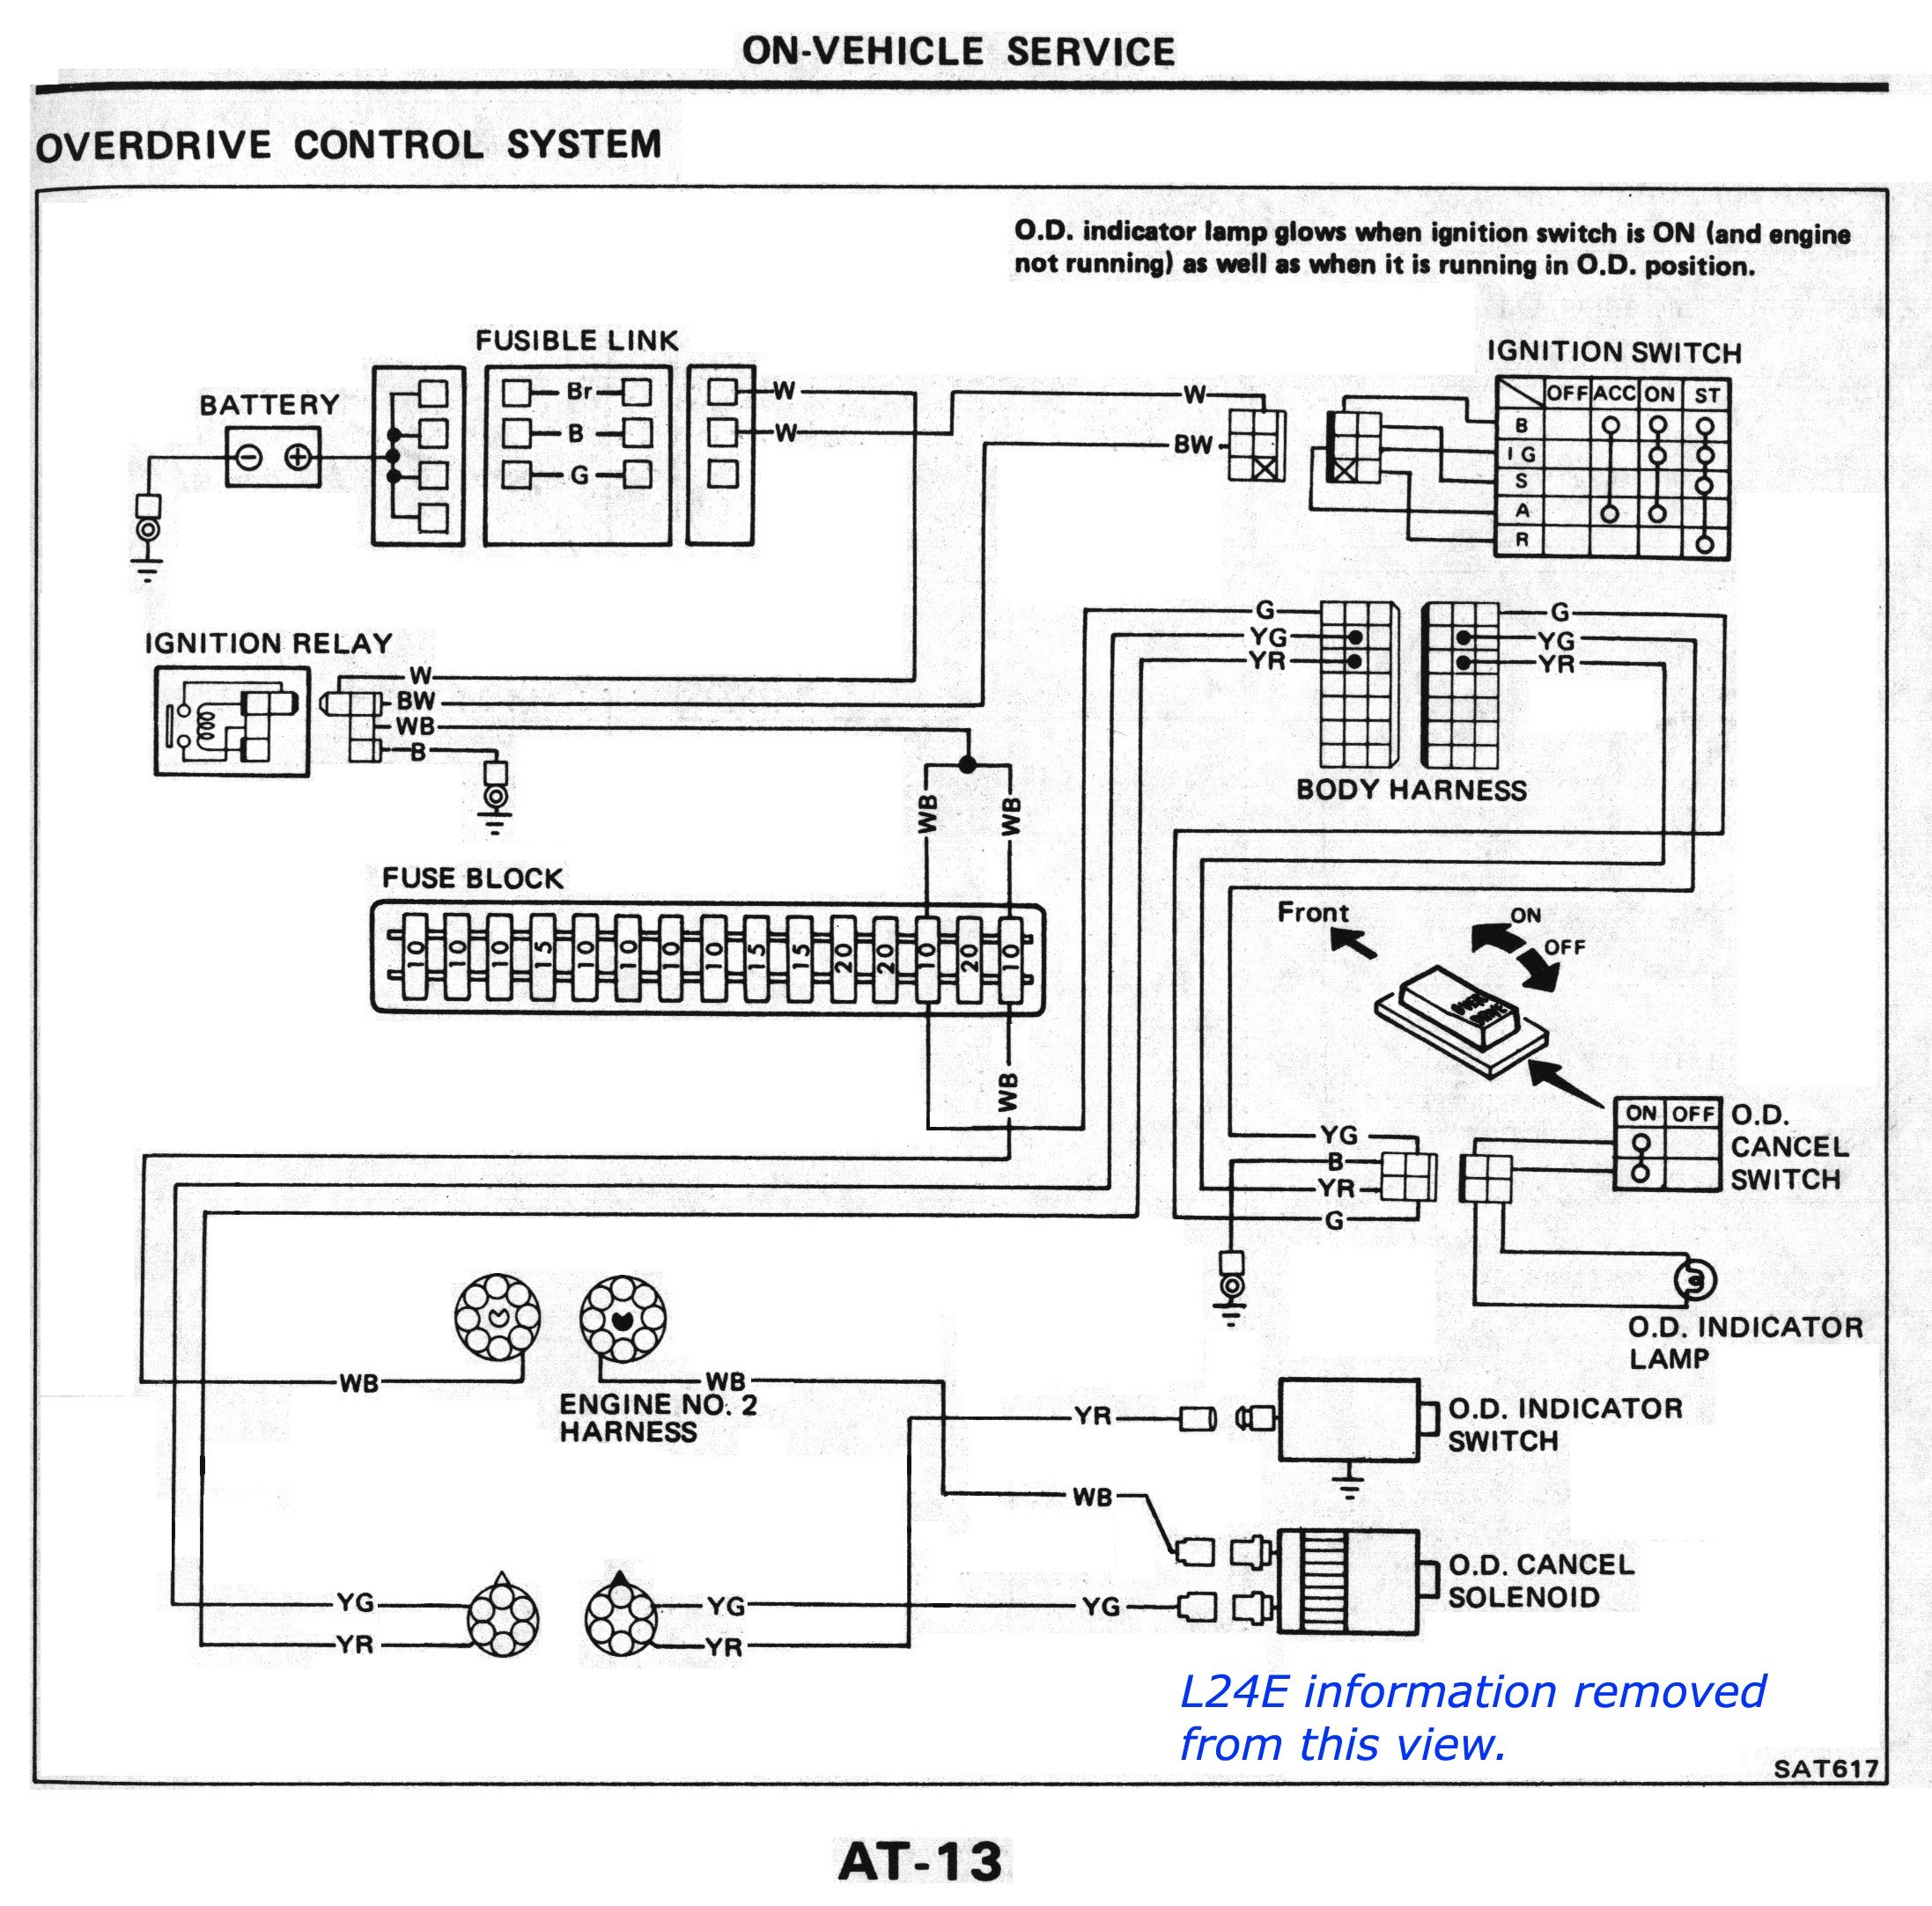 Wiring Diagram for Push button Start Valid Nissan sel forums • View topic L4n71b Od at 1983